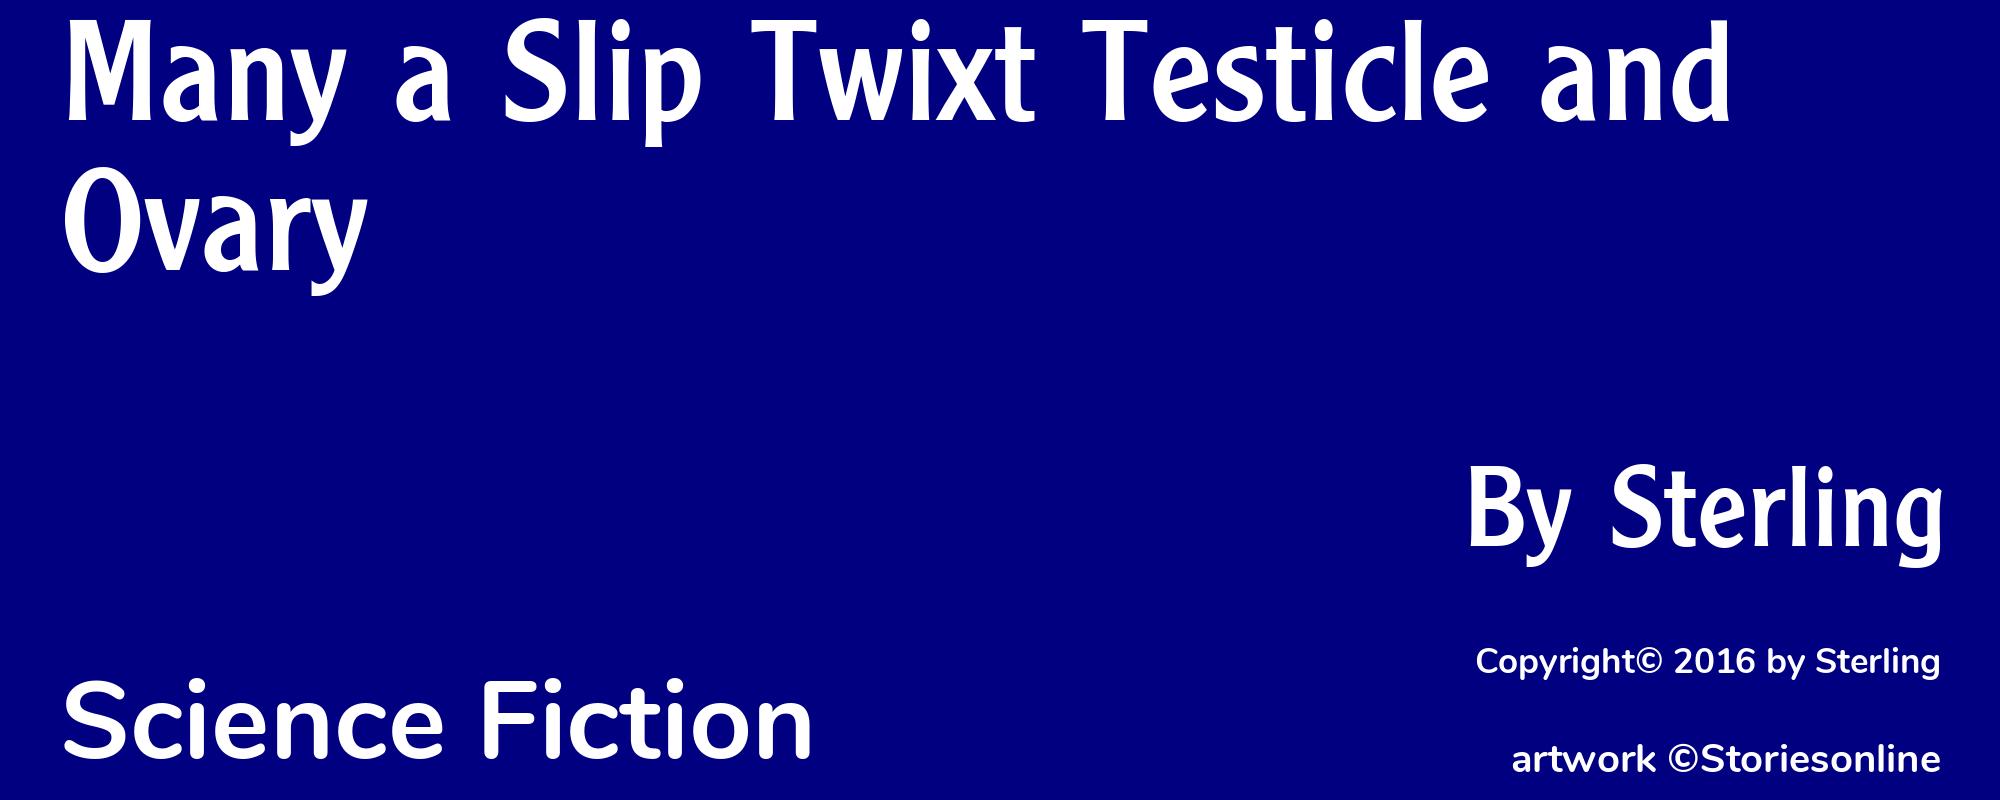 Many a Slip Twixt Testicle and Ovary - Cover